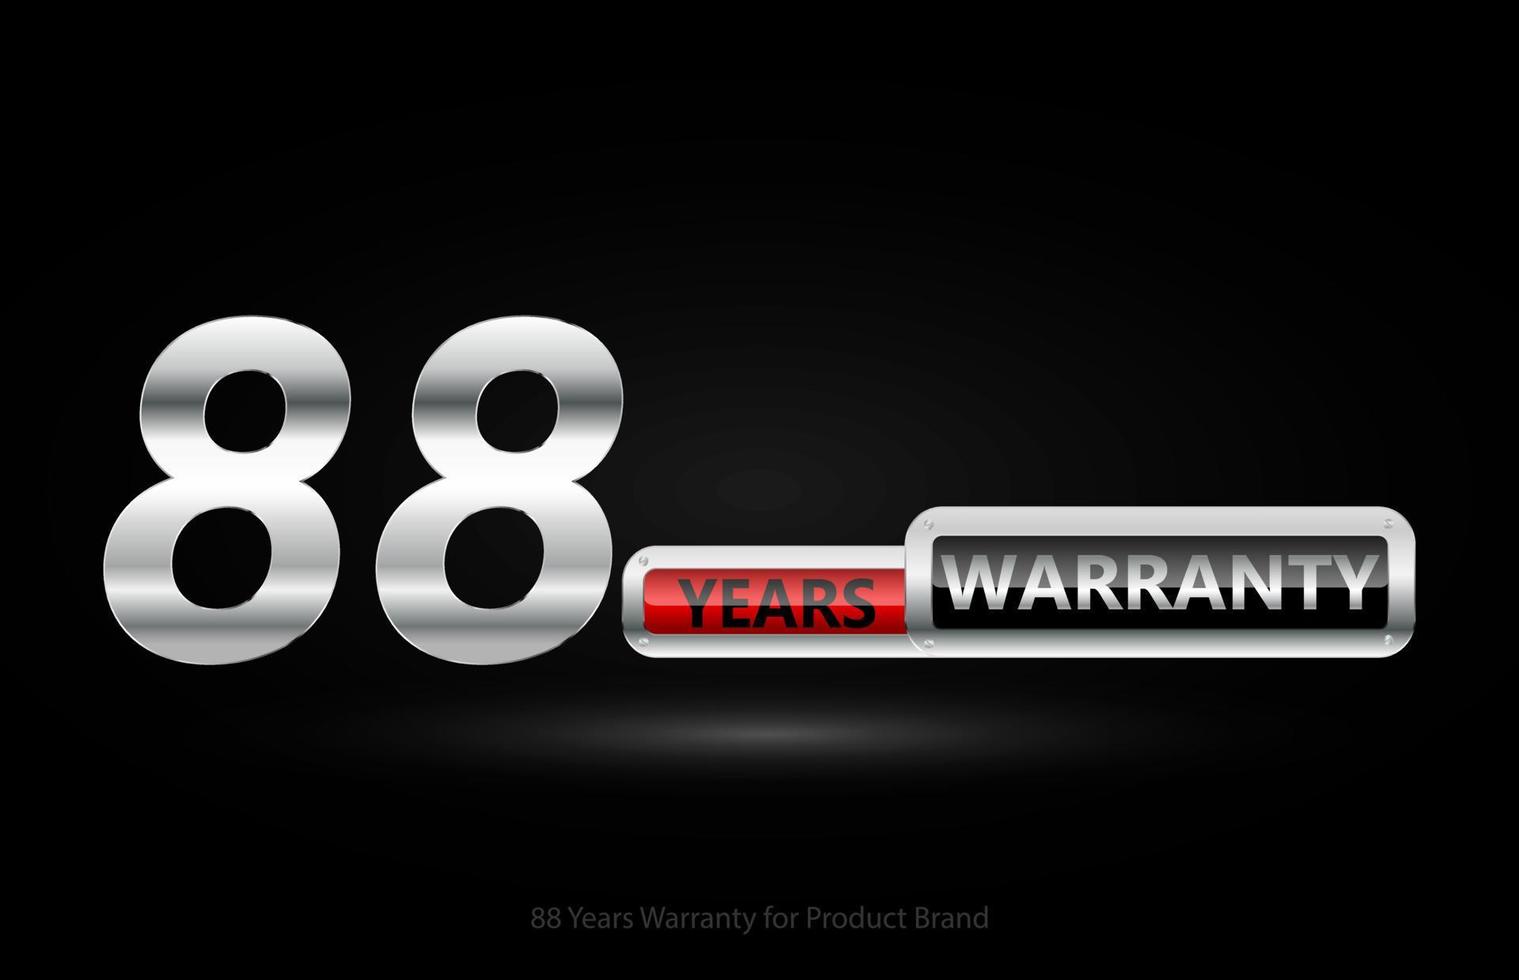 88 years warranty silver logo isolated on black background, vector design for product warranty, guarantee, service, corporate, and your business.